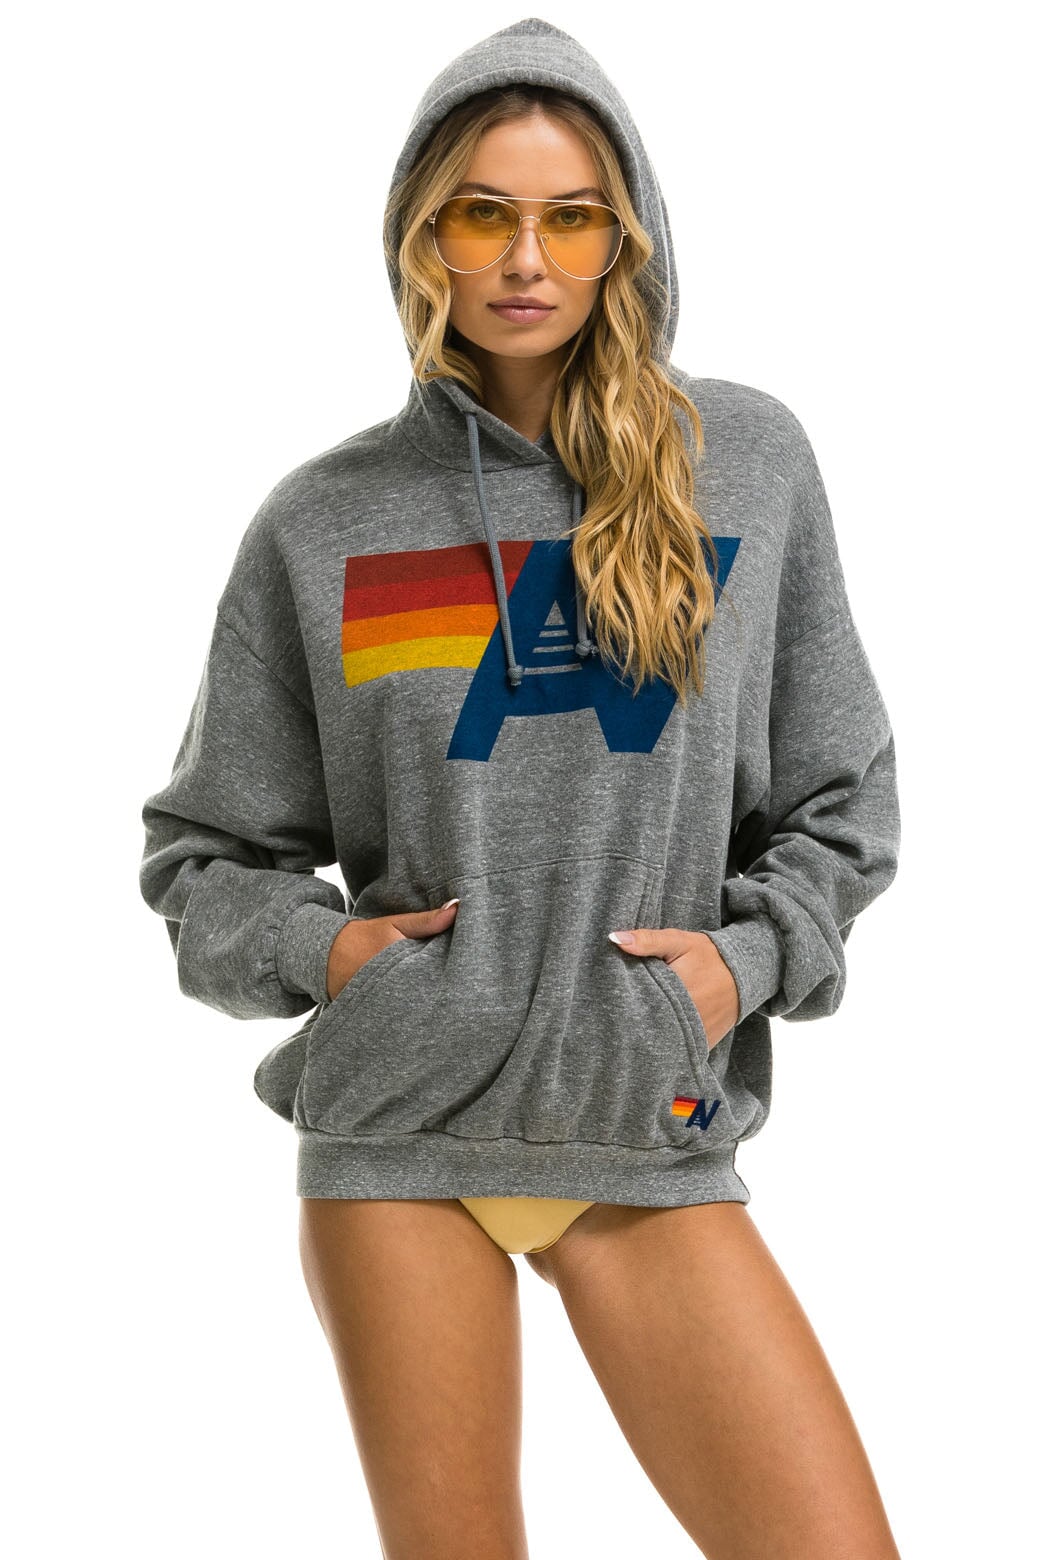 Nation HOODIE - PULLOVER - Aviator LOGO GREY HEATHER RELAXED